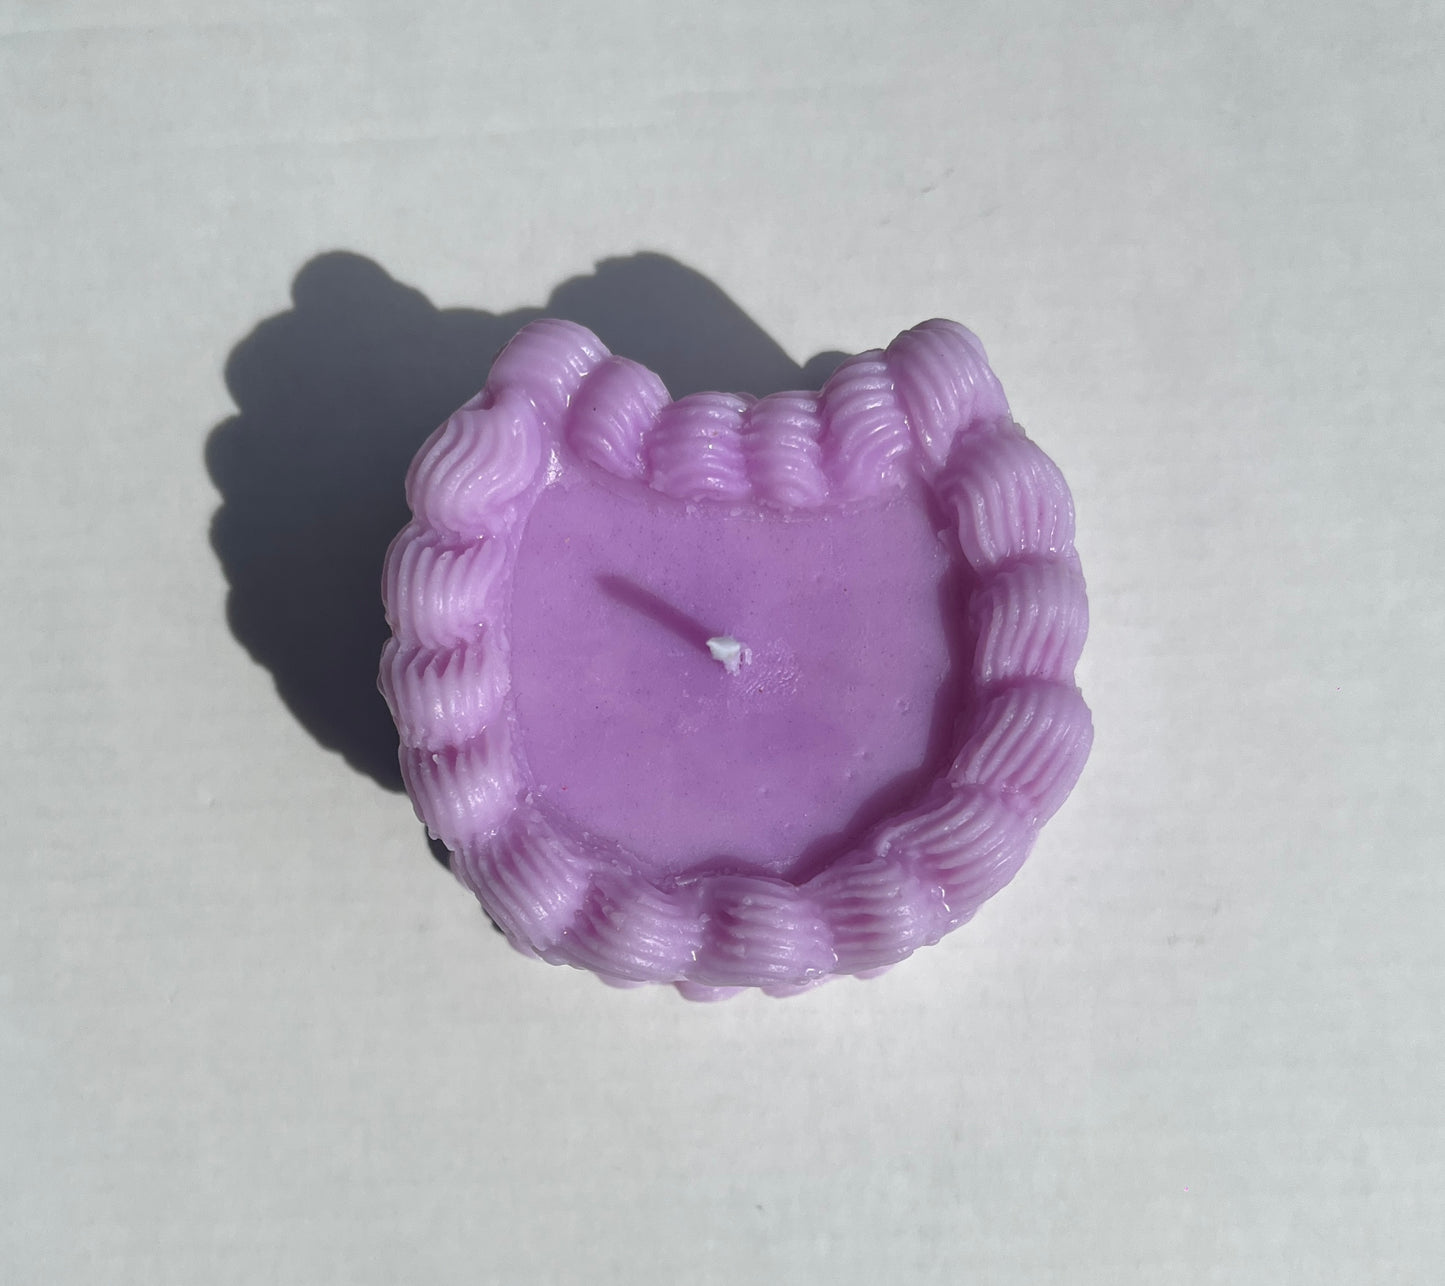 Millie Wollney: Kitty Cake Candles